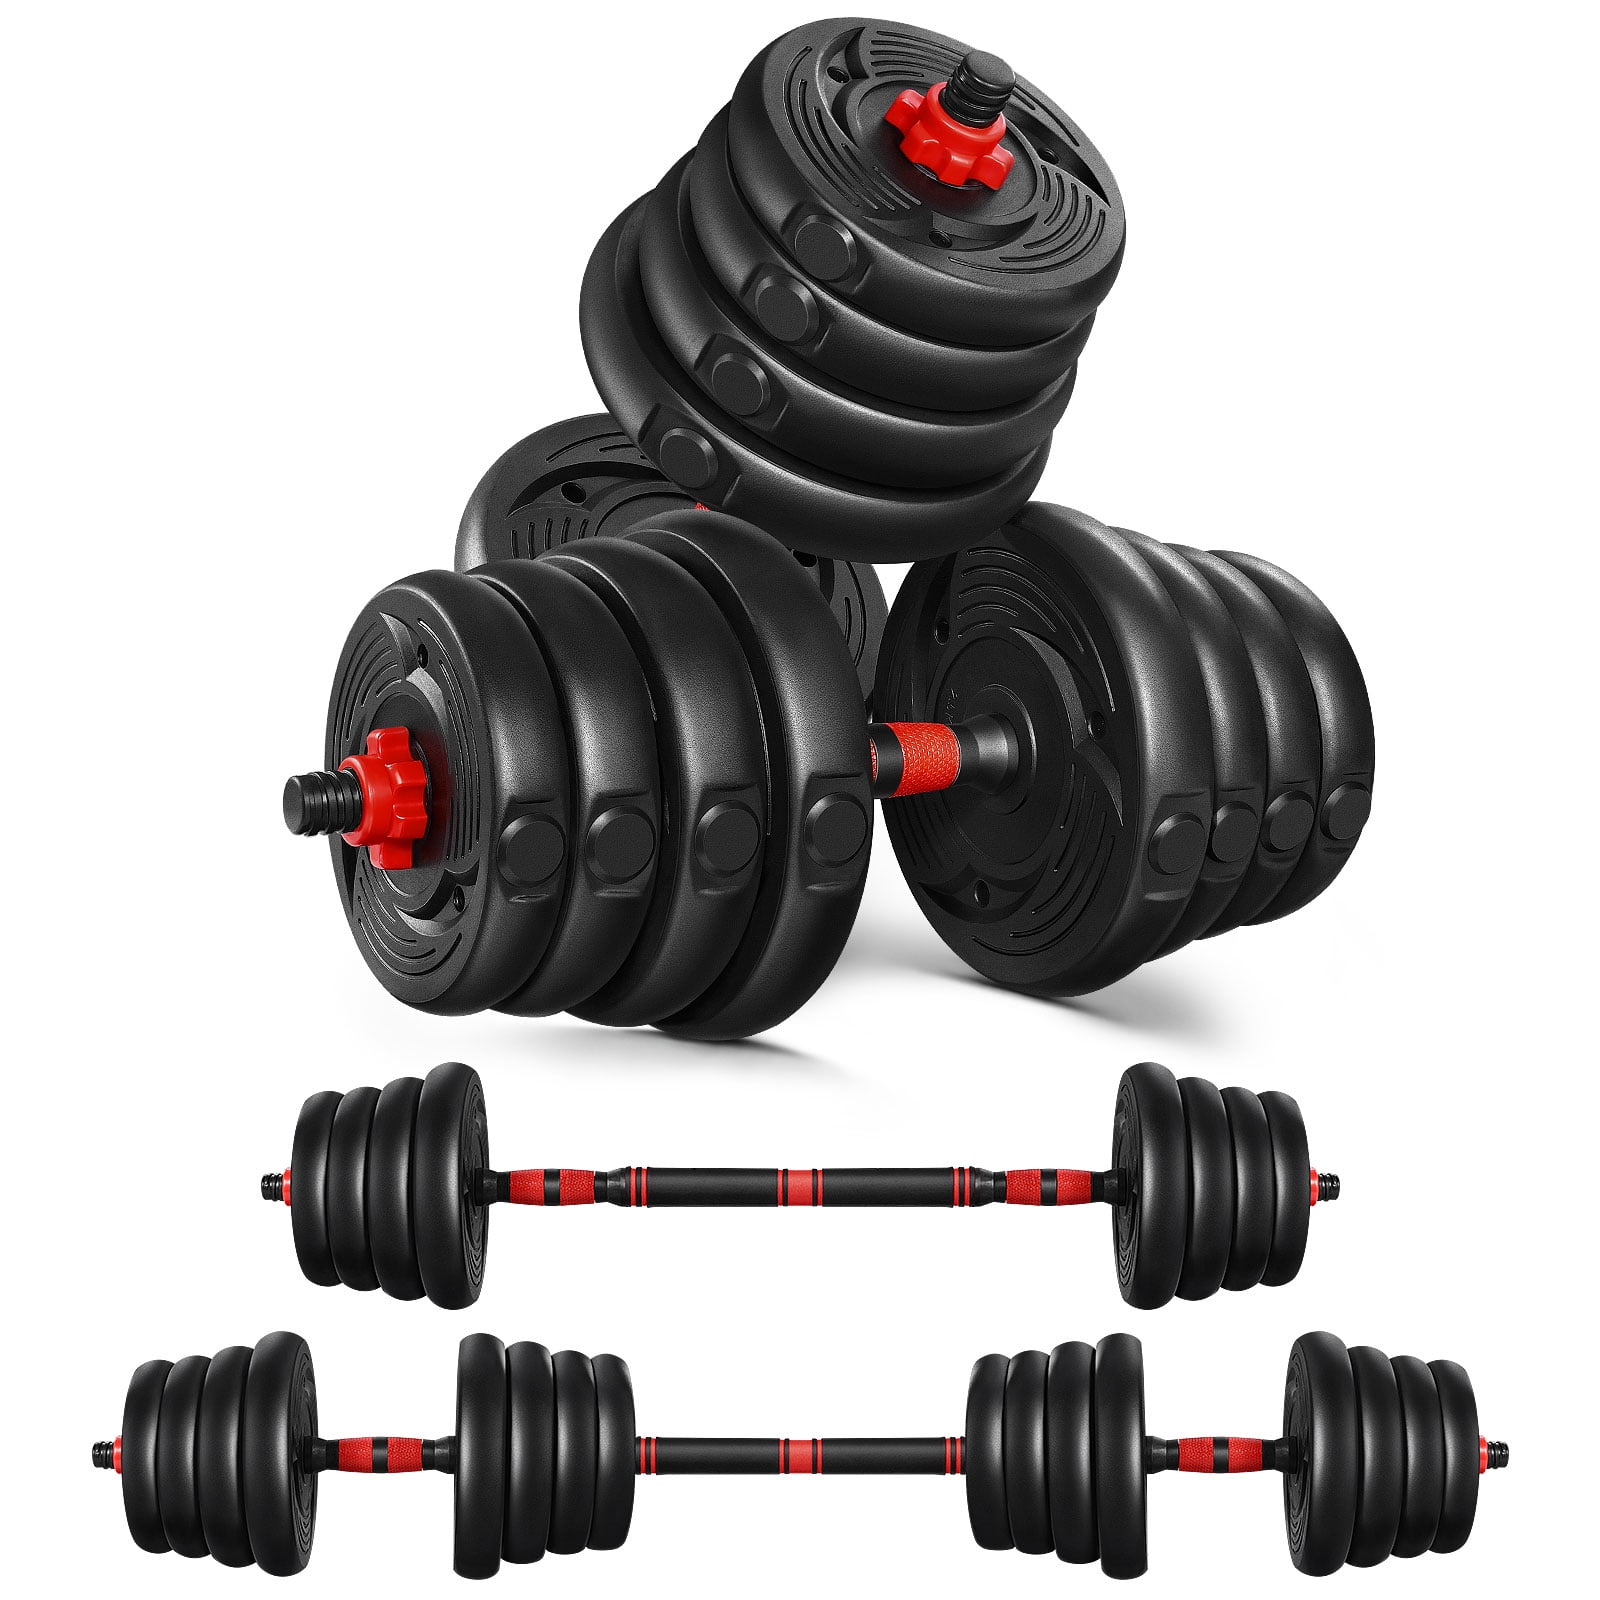 RELIANCER Set of 2 Adjustable Dumbbell Weight Pair with Non-Slip Neoprene Handle Multiple Weight Options Single All-Purpose Women Exercise Dumbbells Set for Home Gym Office Workout Fitness 